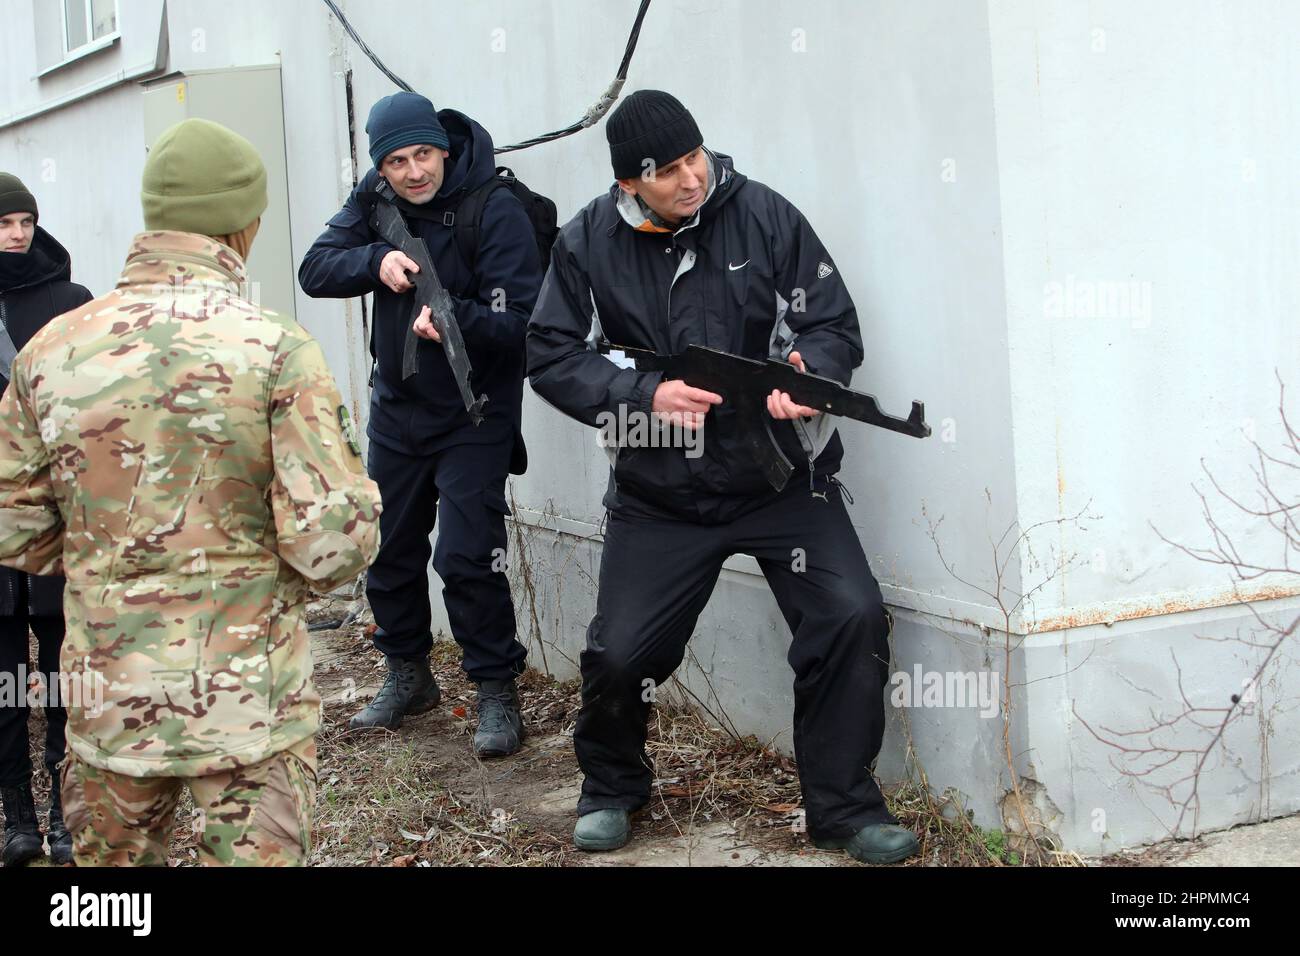 KHARKIV, UKRAINE - FEBRUARY 19, 2022 - Two men with rifle cutouts take cover behind a corner during the territorial defence drill for civilians given Stock Photo